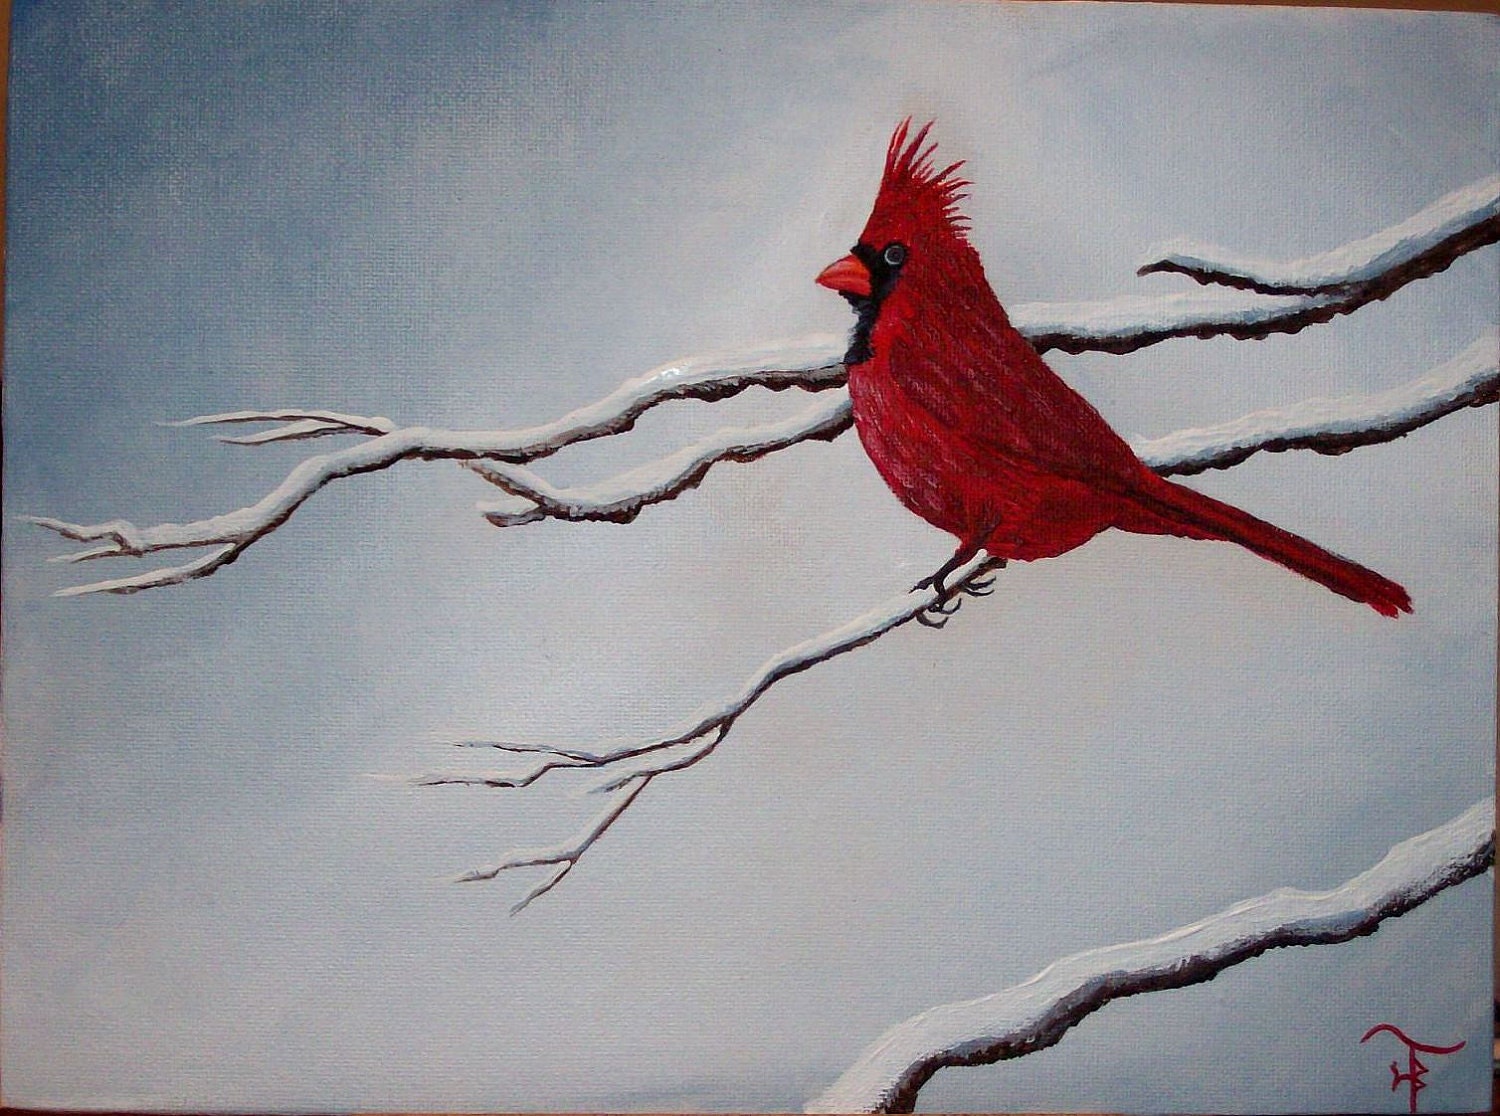 Cold Cardinal Bird in the snow on Branch Minimalist by Ysssk71